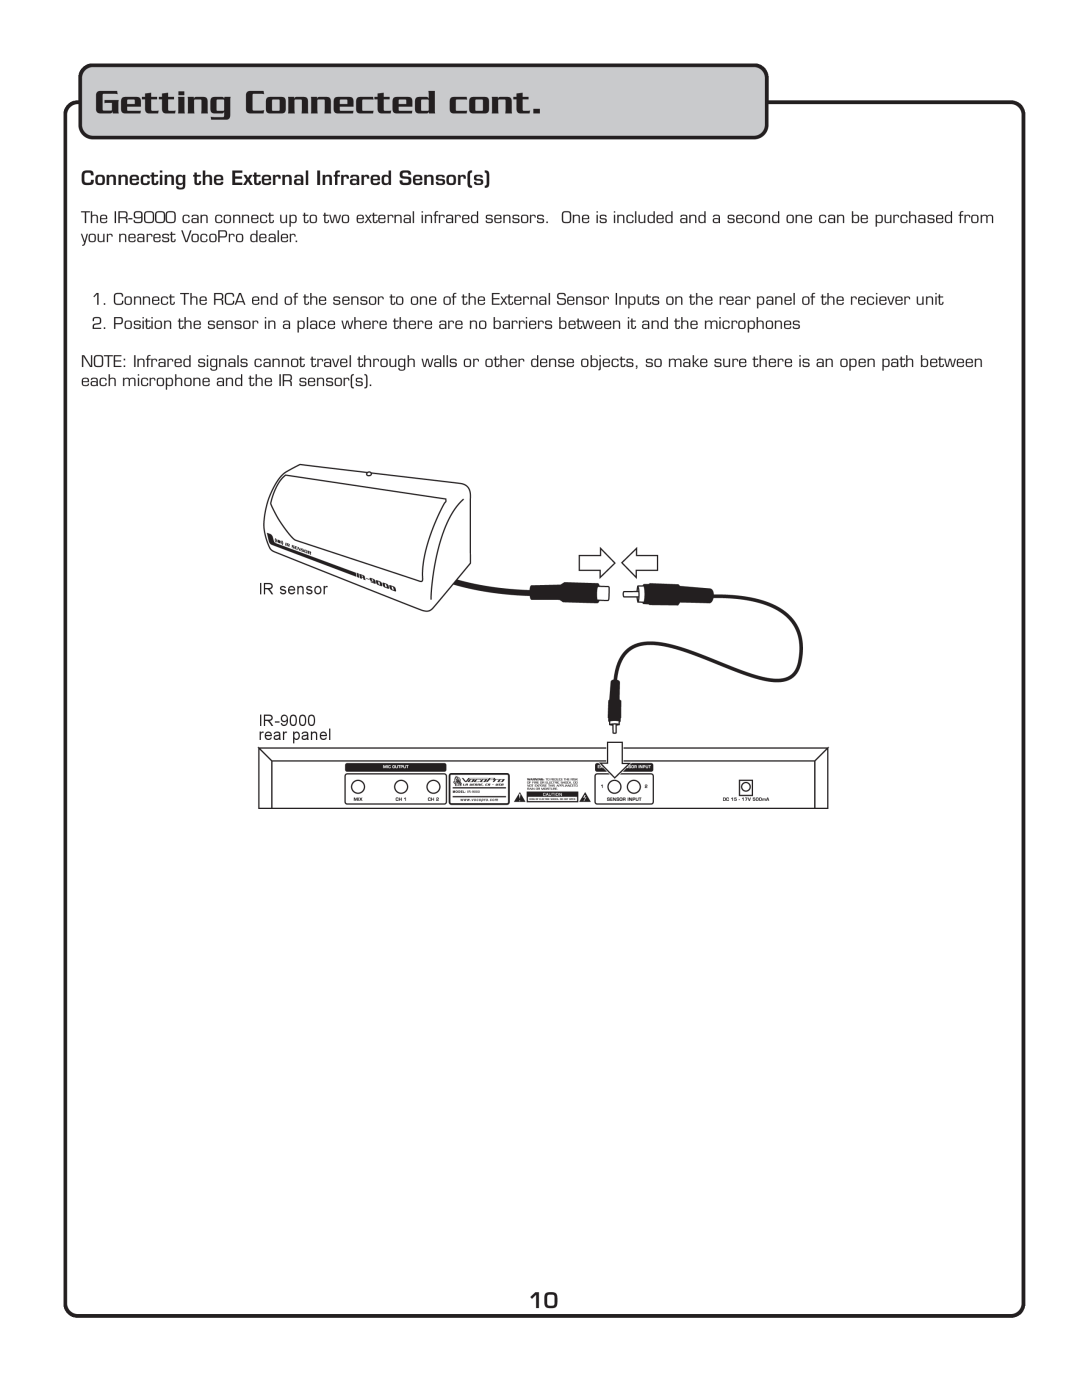 VocoPro IR-9000 owner manual Getting Connected cont, Connecting the External Infrared Sensors 